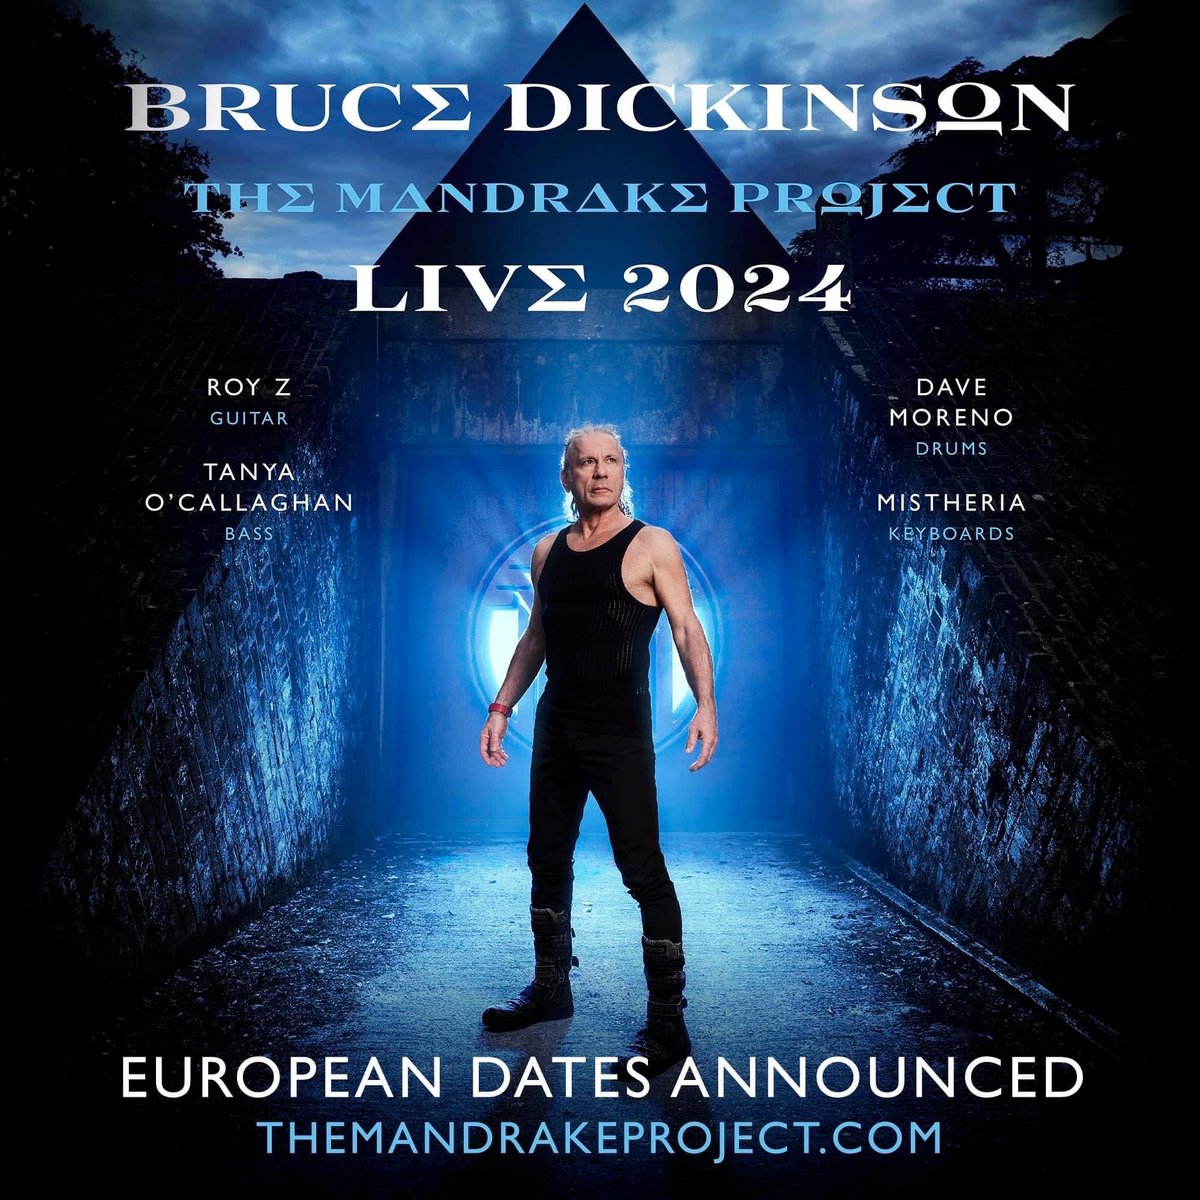 Tickets for Bruce’s #TheMandrakeProject European Tour are now on sale!

Which show will you be going to?! TheMandrakeProject.com

#BruceDickinson #Tour #Tickets